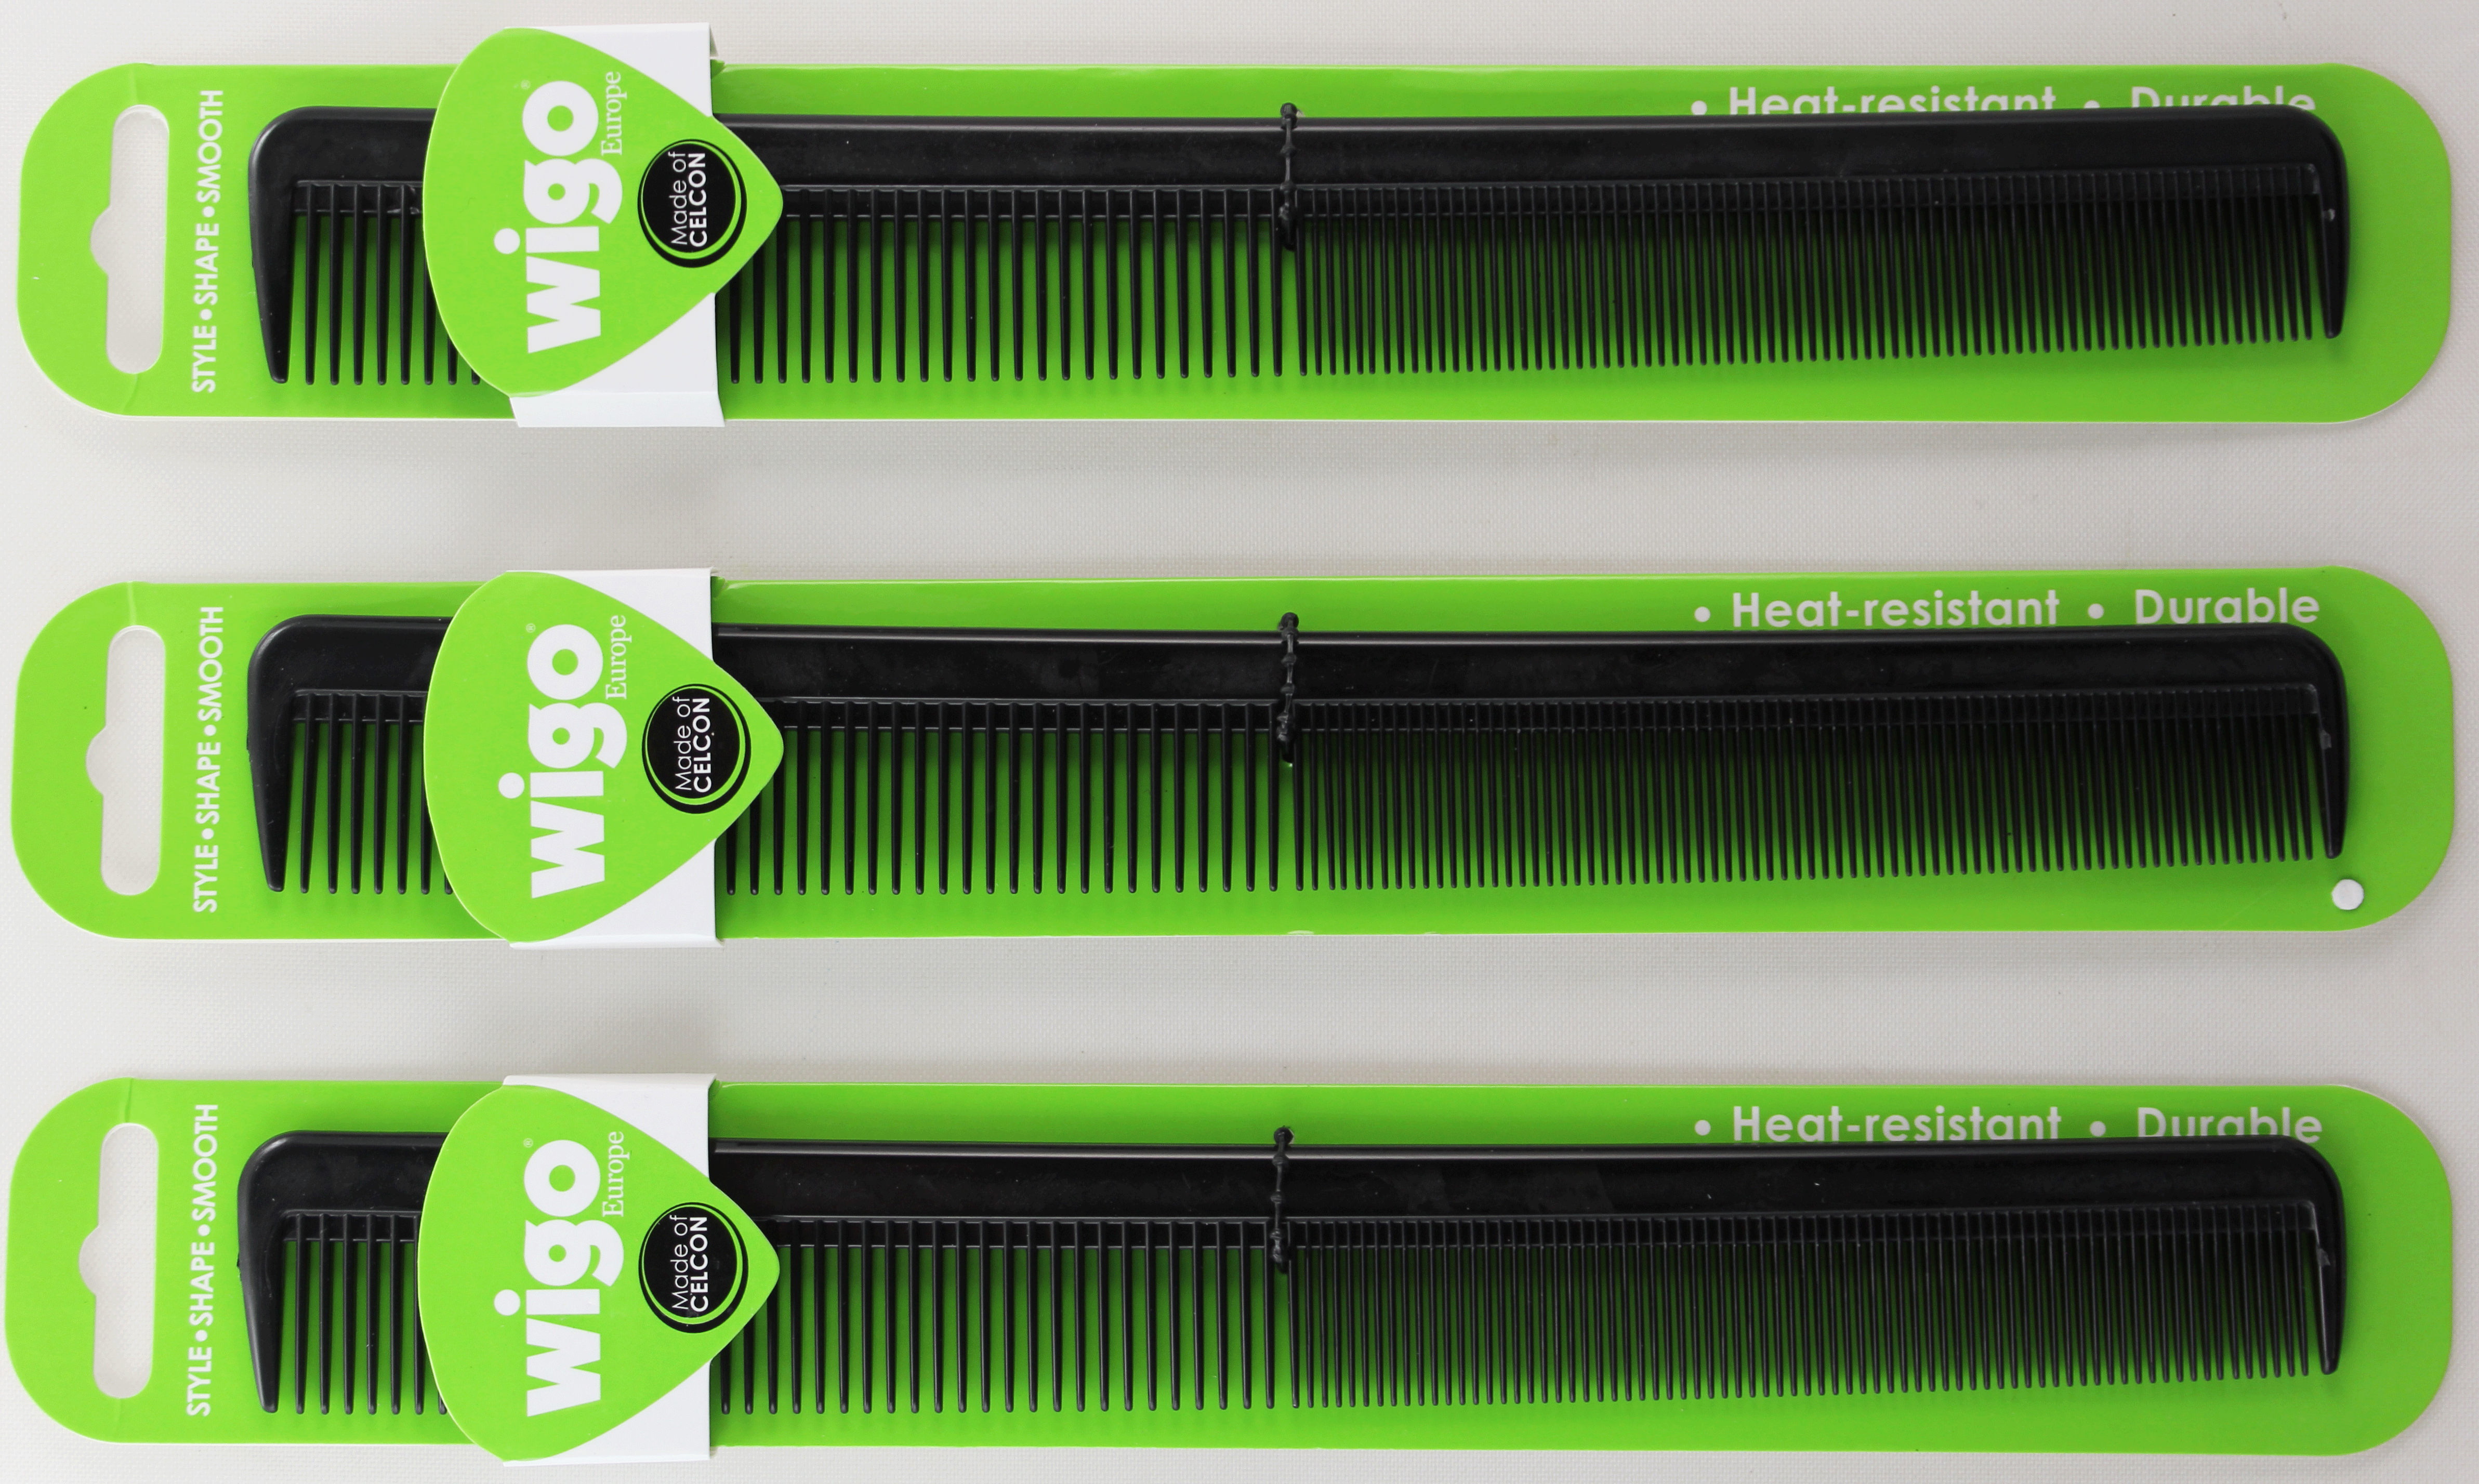 Wigo European Heat Resistant Durability Styling Comb, 1Count - Click Image to Close